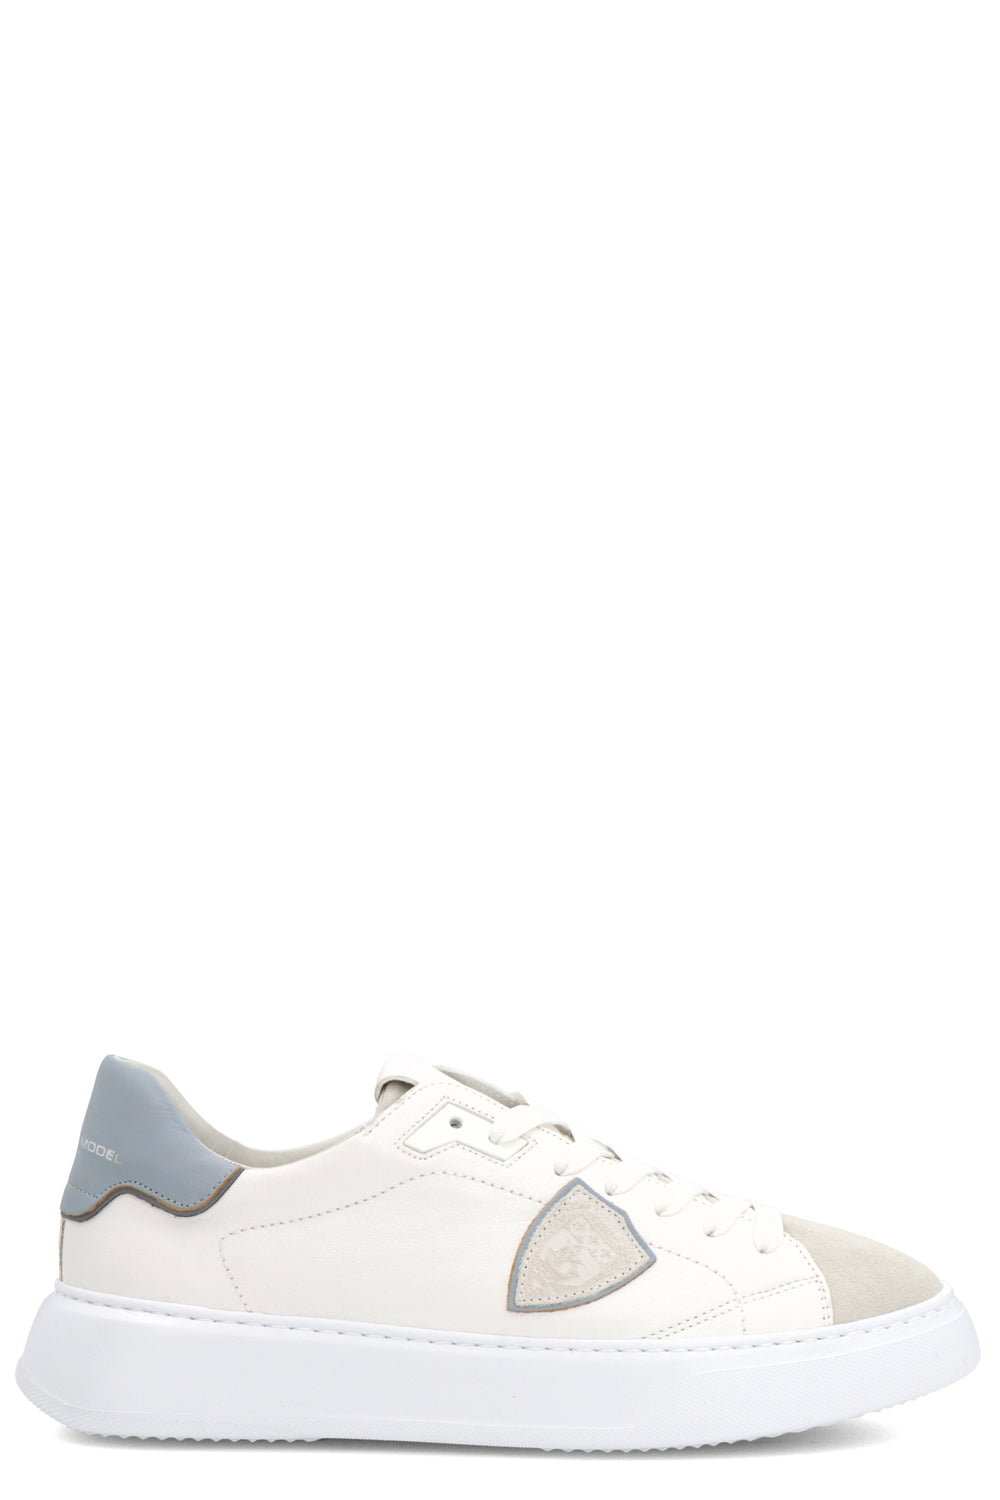 Image of PHILIPPE MODEL Sneaker basse Temple